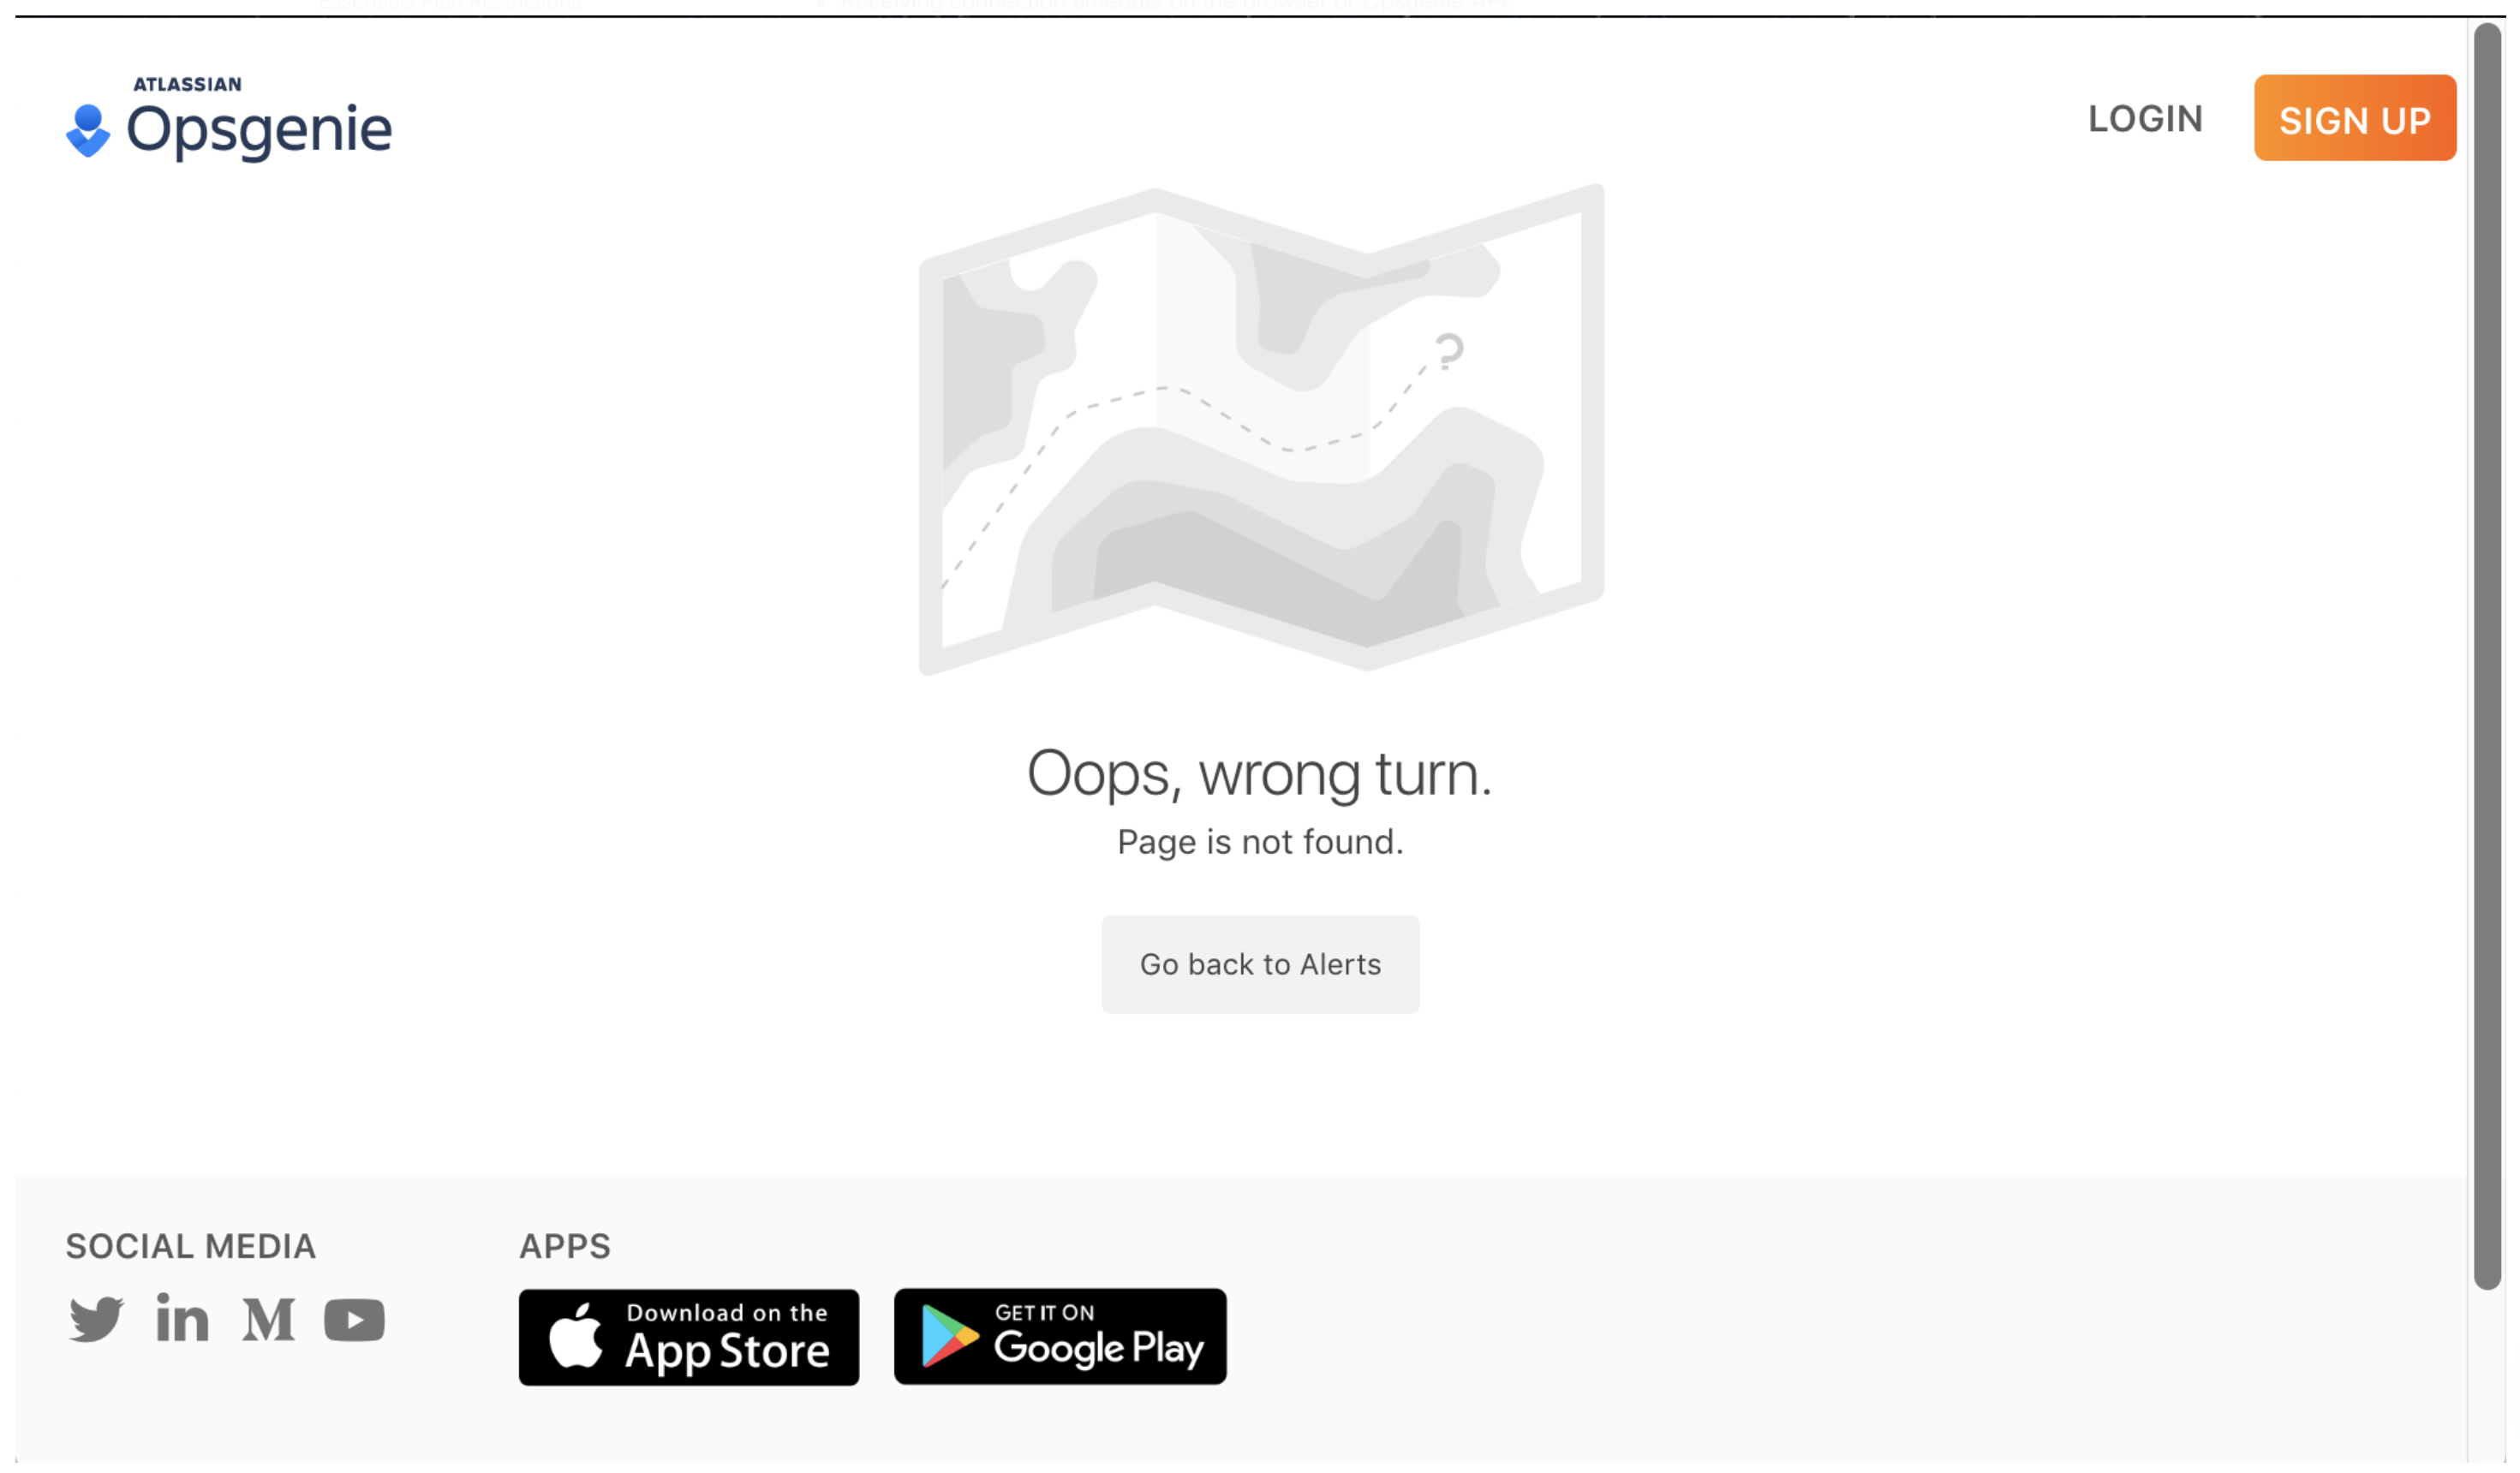 Image of an Opsgenie page with an error message.